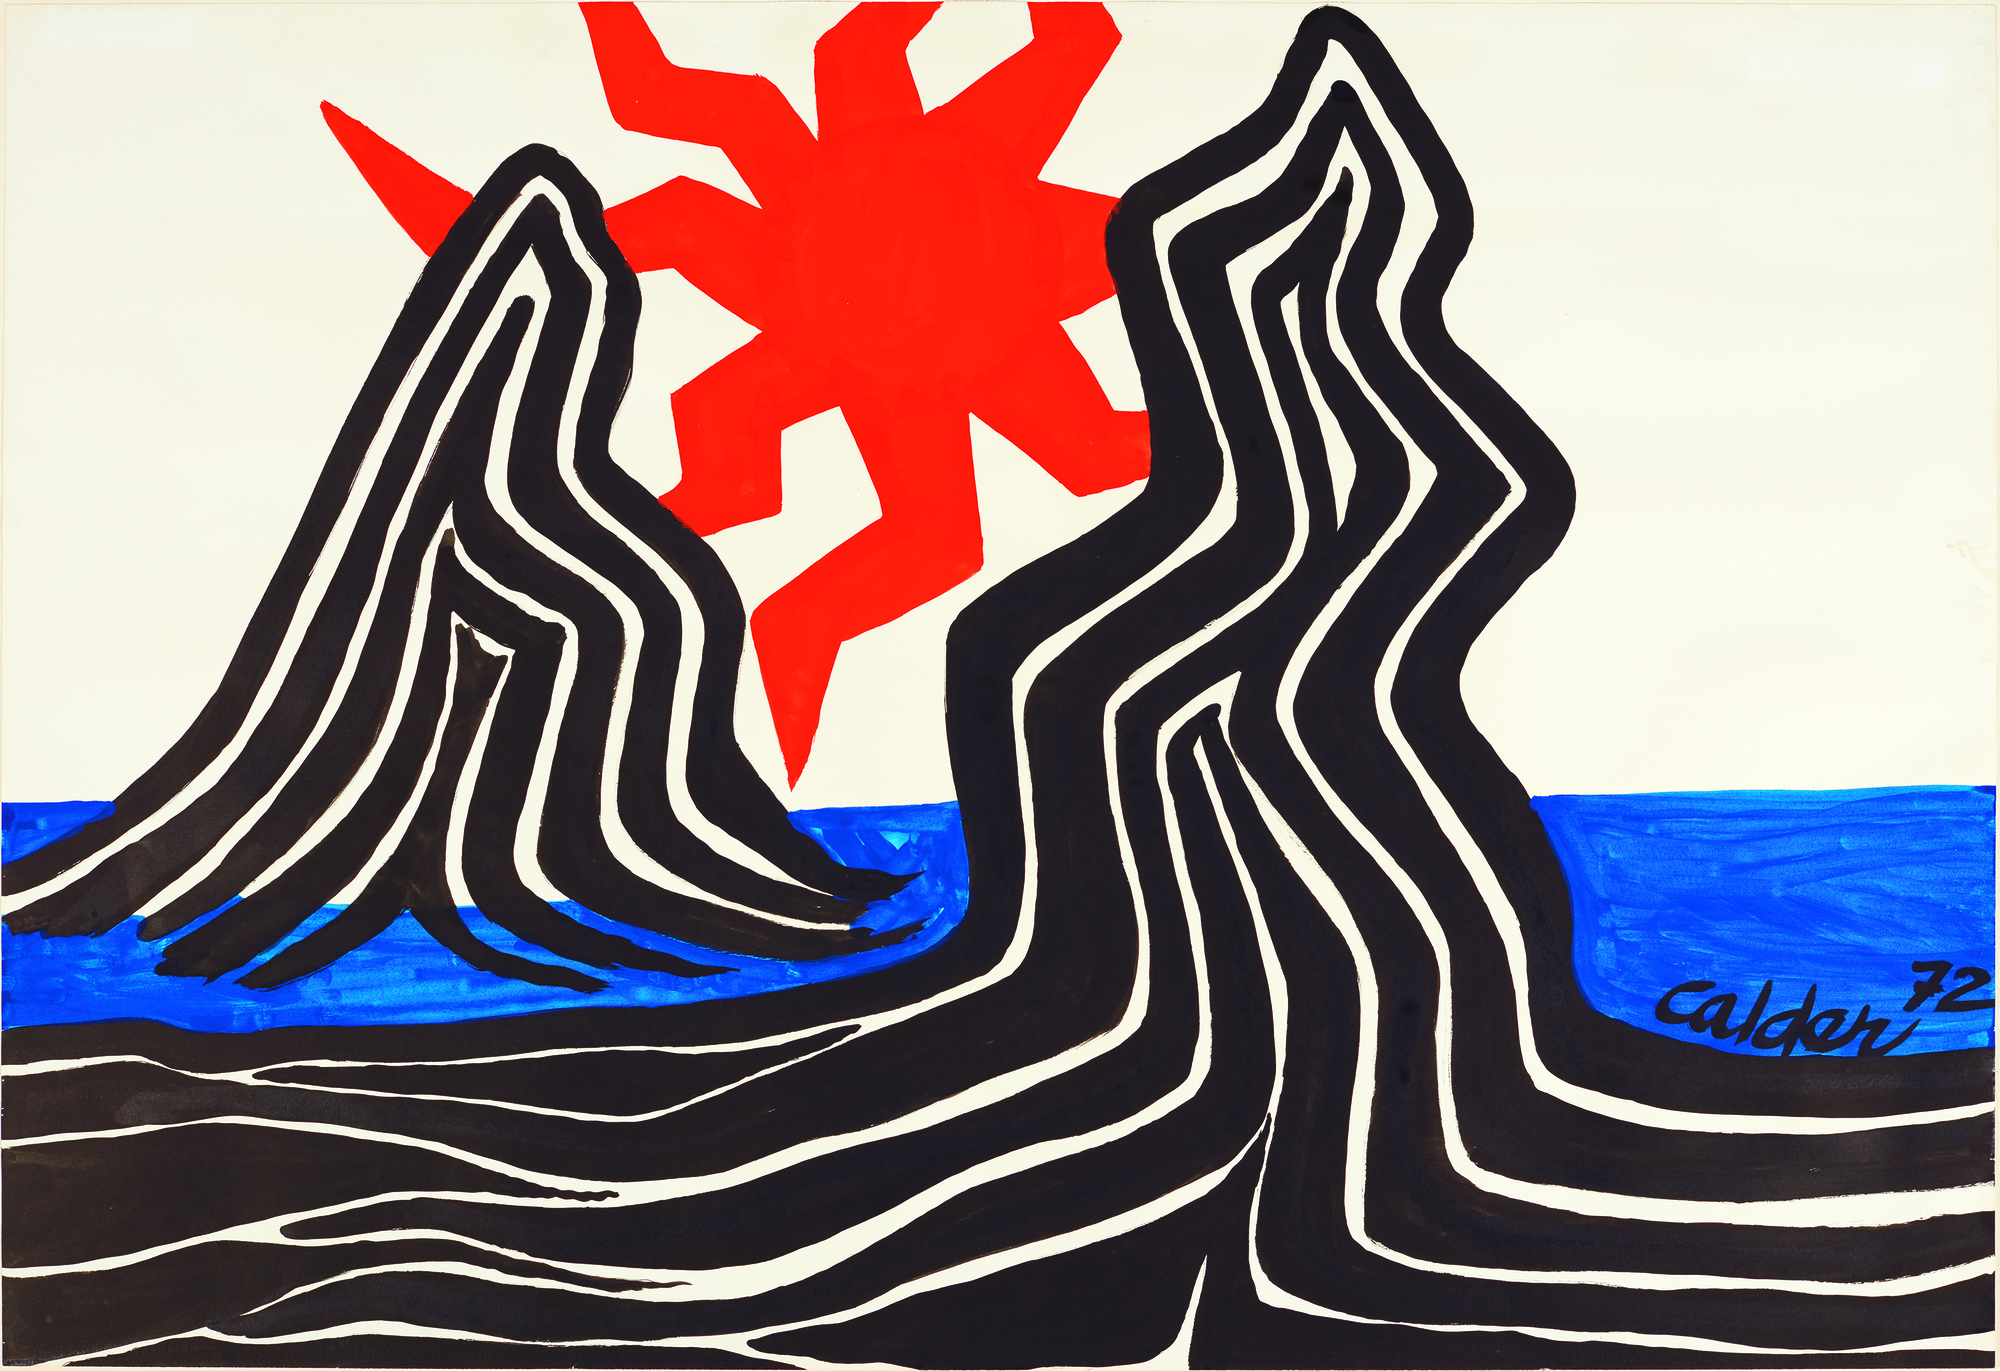 Zigzag, Sun, and Crags, painted in 1972, recalls the early morning hour of June 9, 1922 when the young seafaring adventurer Sandy (Alexander) Calder was awakened on the deck of the H. F. Alexander by the intense beams of tropical sunlight that burst across the bow. He stood, squinting against the glare, then turned his head to the west and felt a sudden rush of sensations that brought to him a cosmic resonance he had never felt before. &lt;br&gt;&lt;br&gt;“It was early one morning on a calm sea, off Guatemala, when over my couch — a coil of rope — I saw the beginning of a fiery red sunrise on one side and the moon looking like a silver coin on the other. Of the whole trip this impressed me most of all; it left me with a lasting sensation of the solar system.” &lt;br&gt;&lt;br&gt;Zignag, Sun, and Crags is not a simple memento of that experience. It is an exhilarating work that celebrates Calder’s inimitable way of imparting the wonder of the natural world by amplifying our experience of it. If, as he might wish, it brings a sense of interconnectedness and belonging as it did to him along the coast of Guatemala as a young Merchant Marine, so much the better.